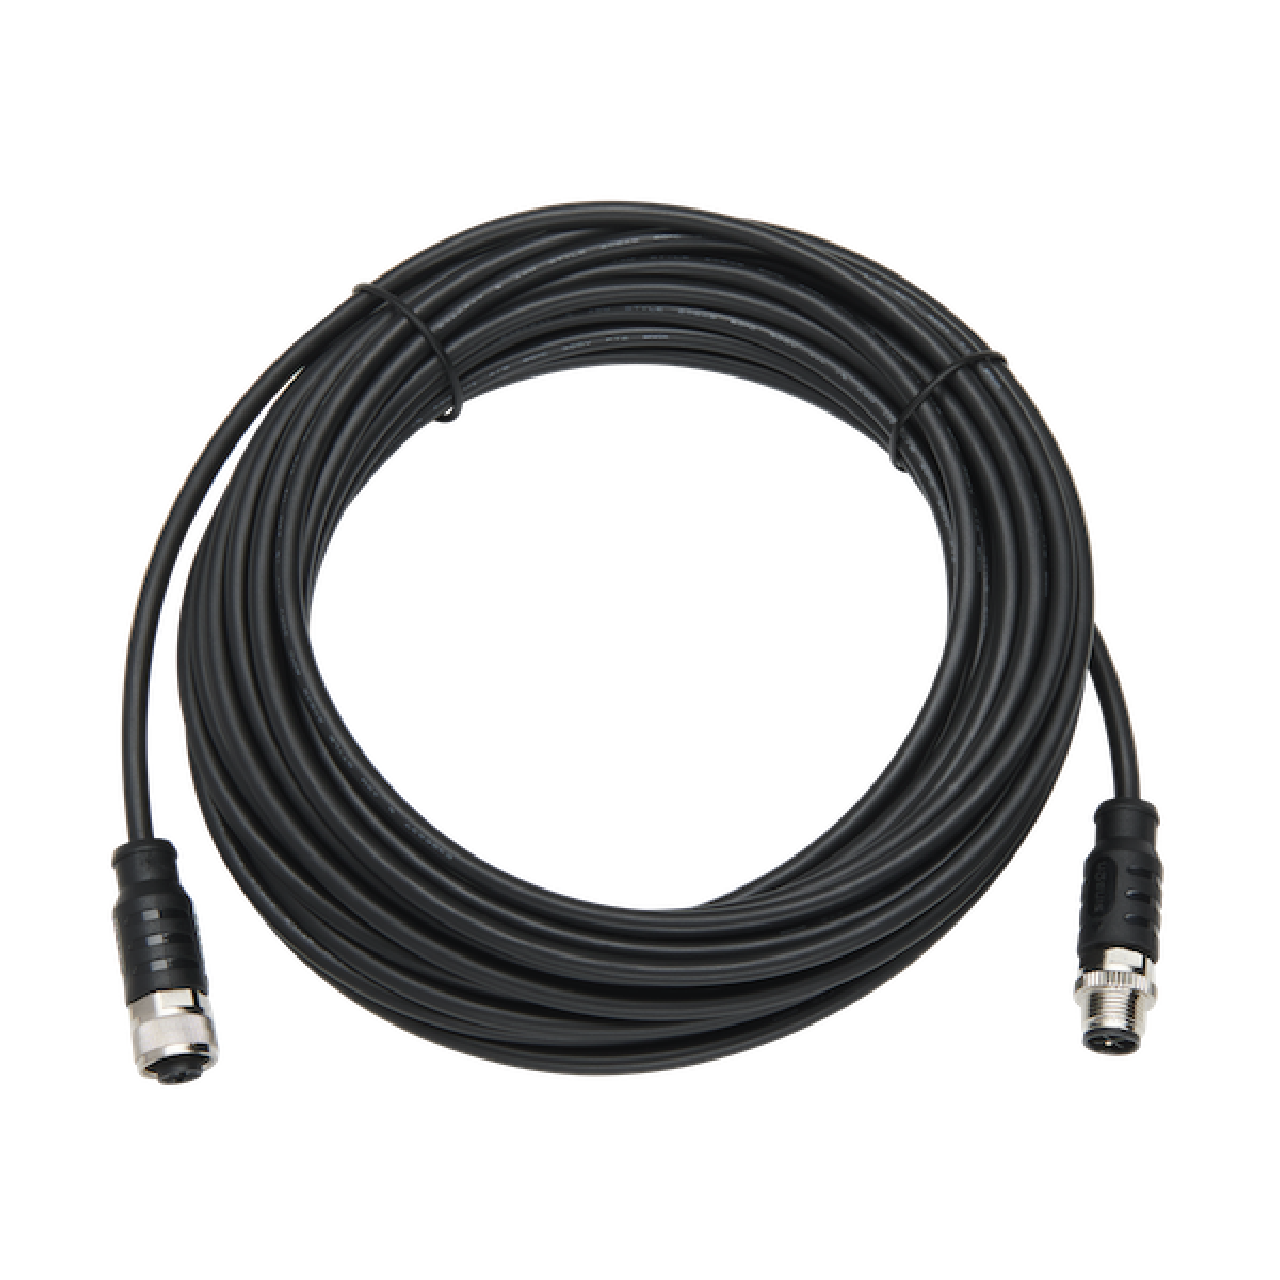 M12 to M12 DC Output Line Cord, 3.5 meter